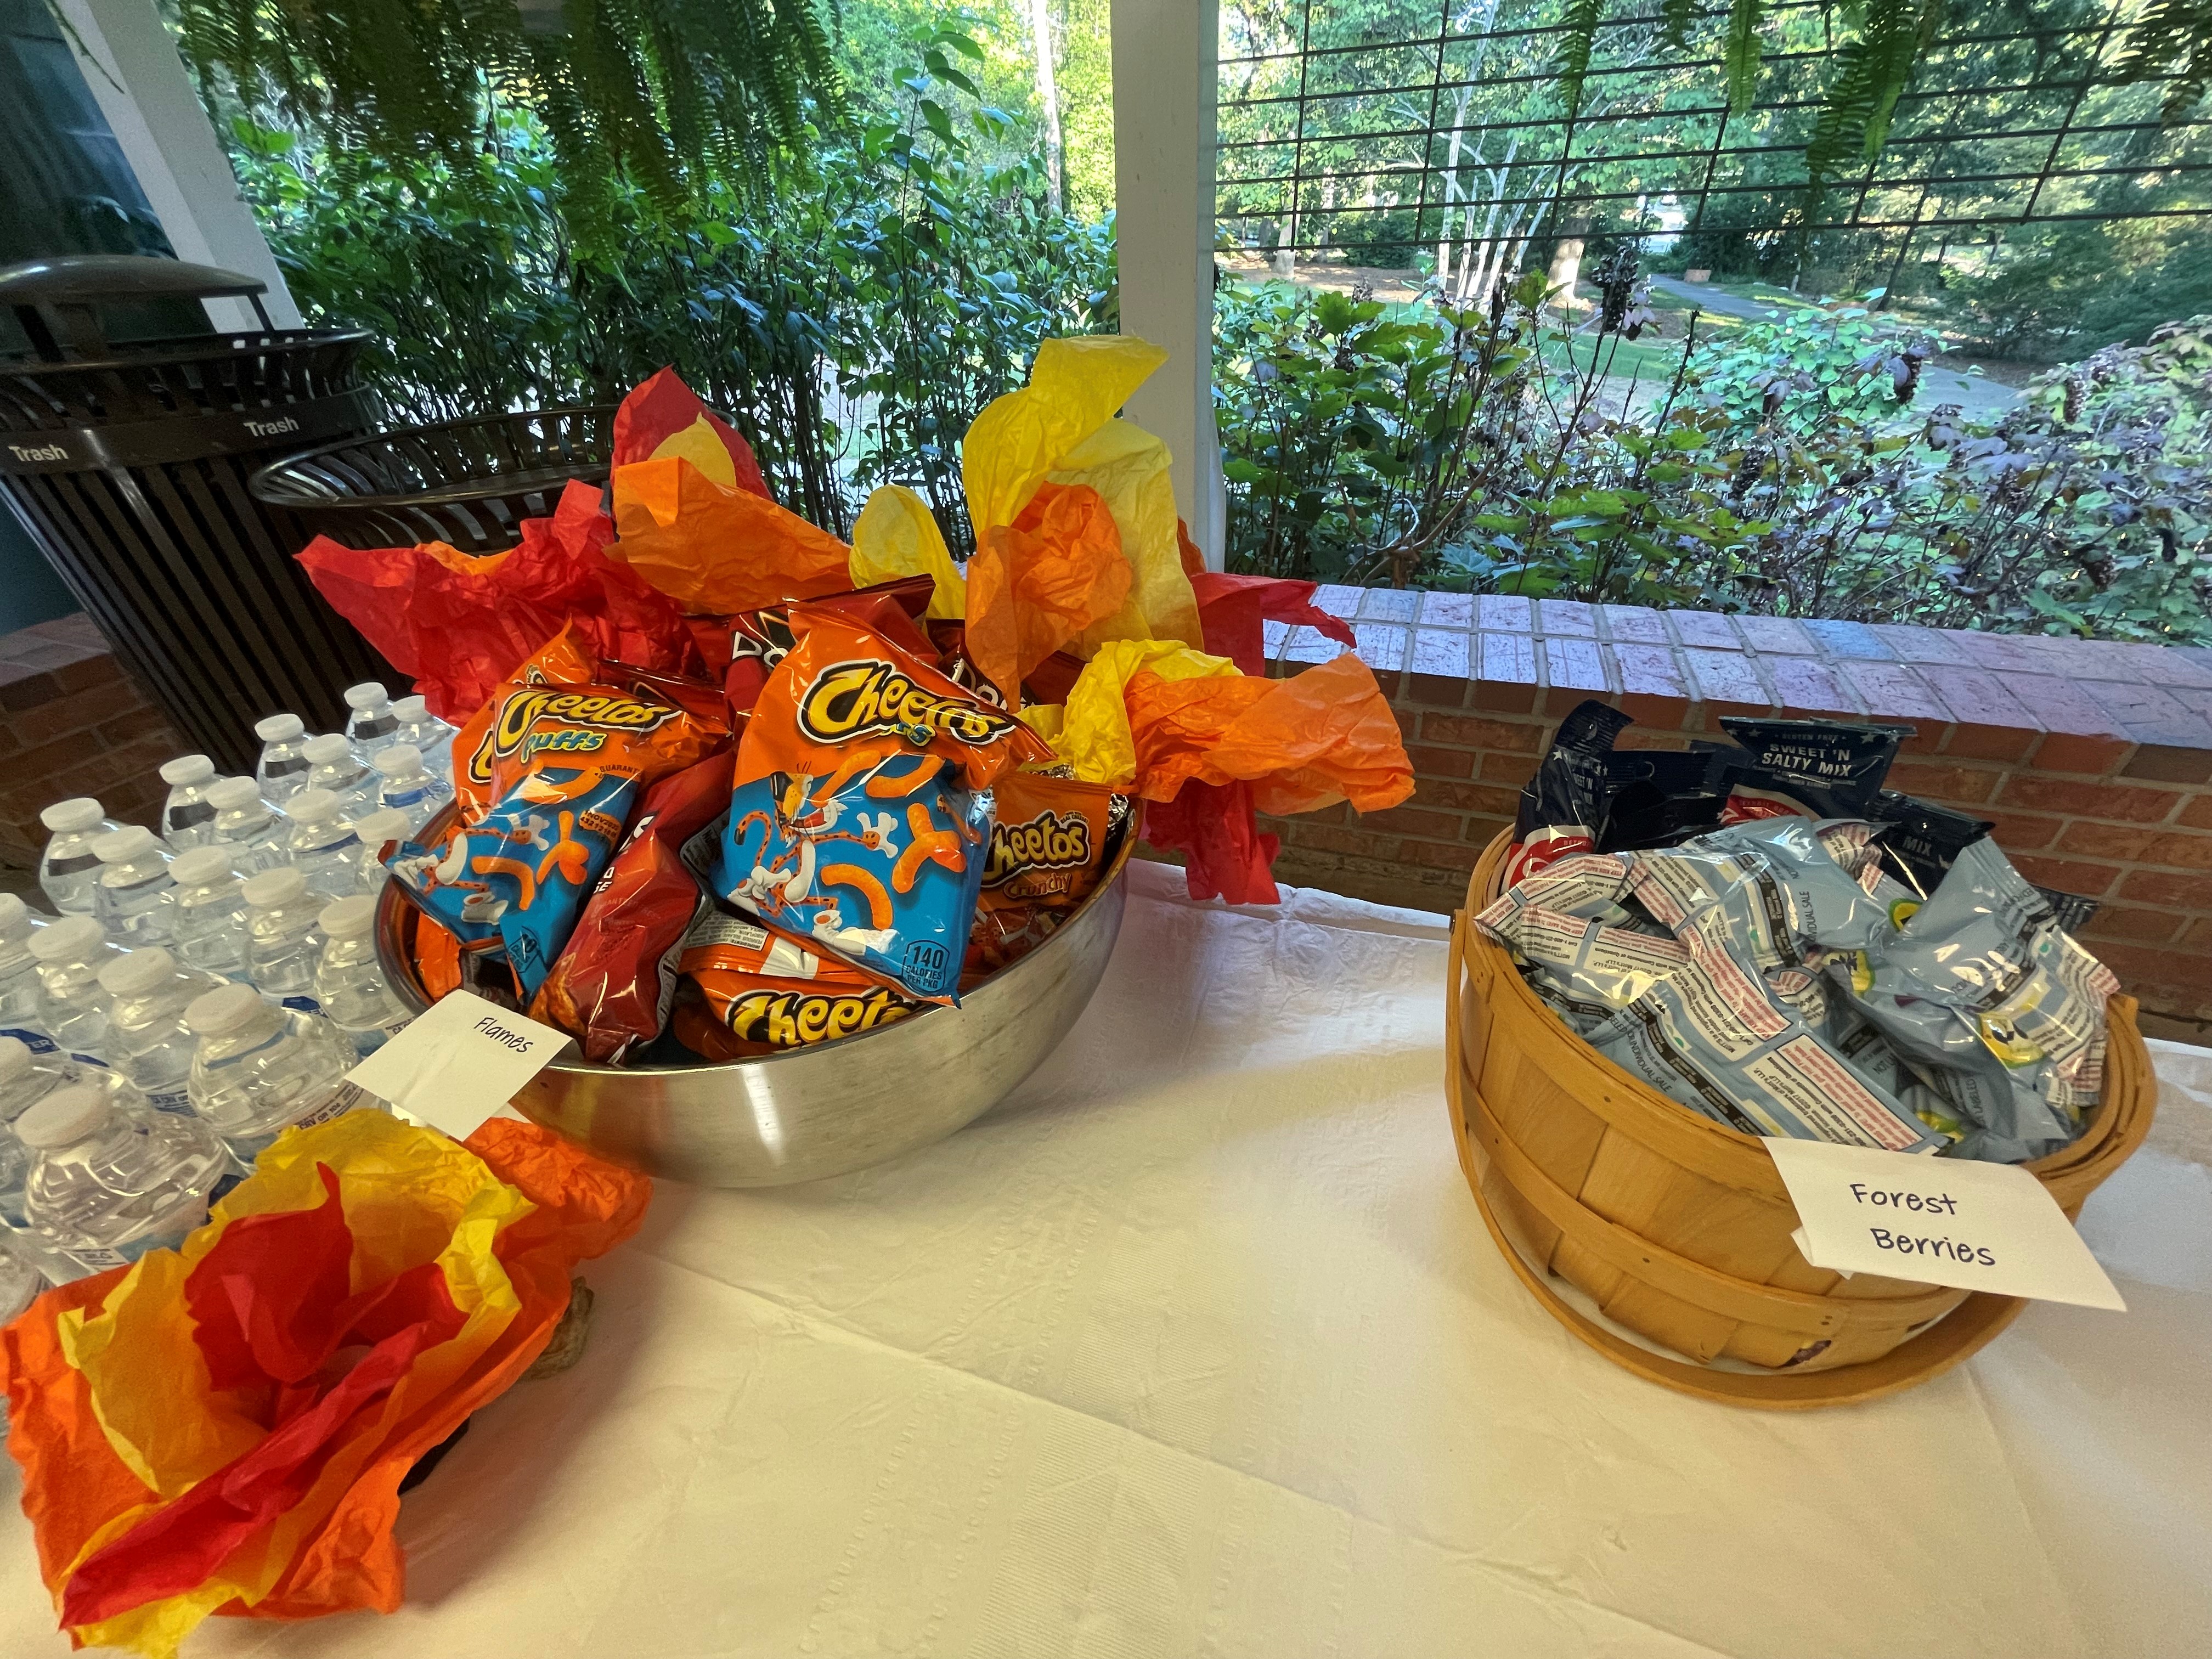 Tissue paper campfires adorned the snacks and drinks at the event.